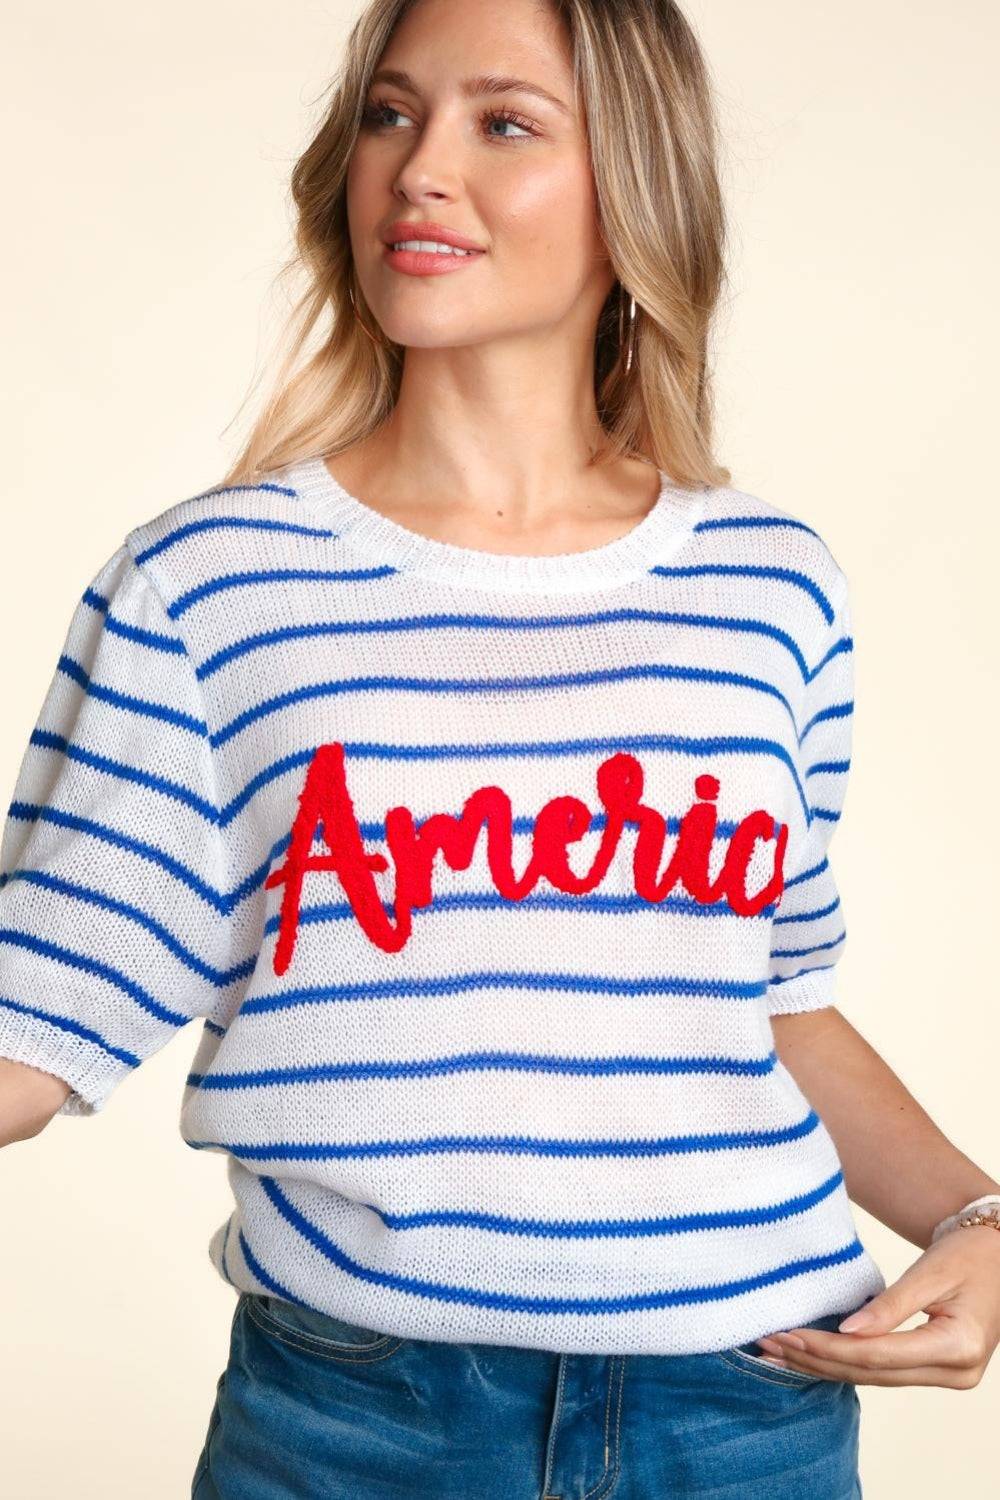 a woman wearing a sweater with the word america painted on it